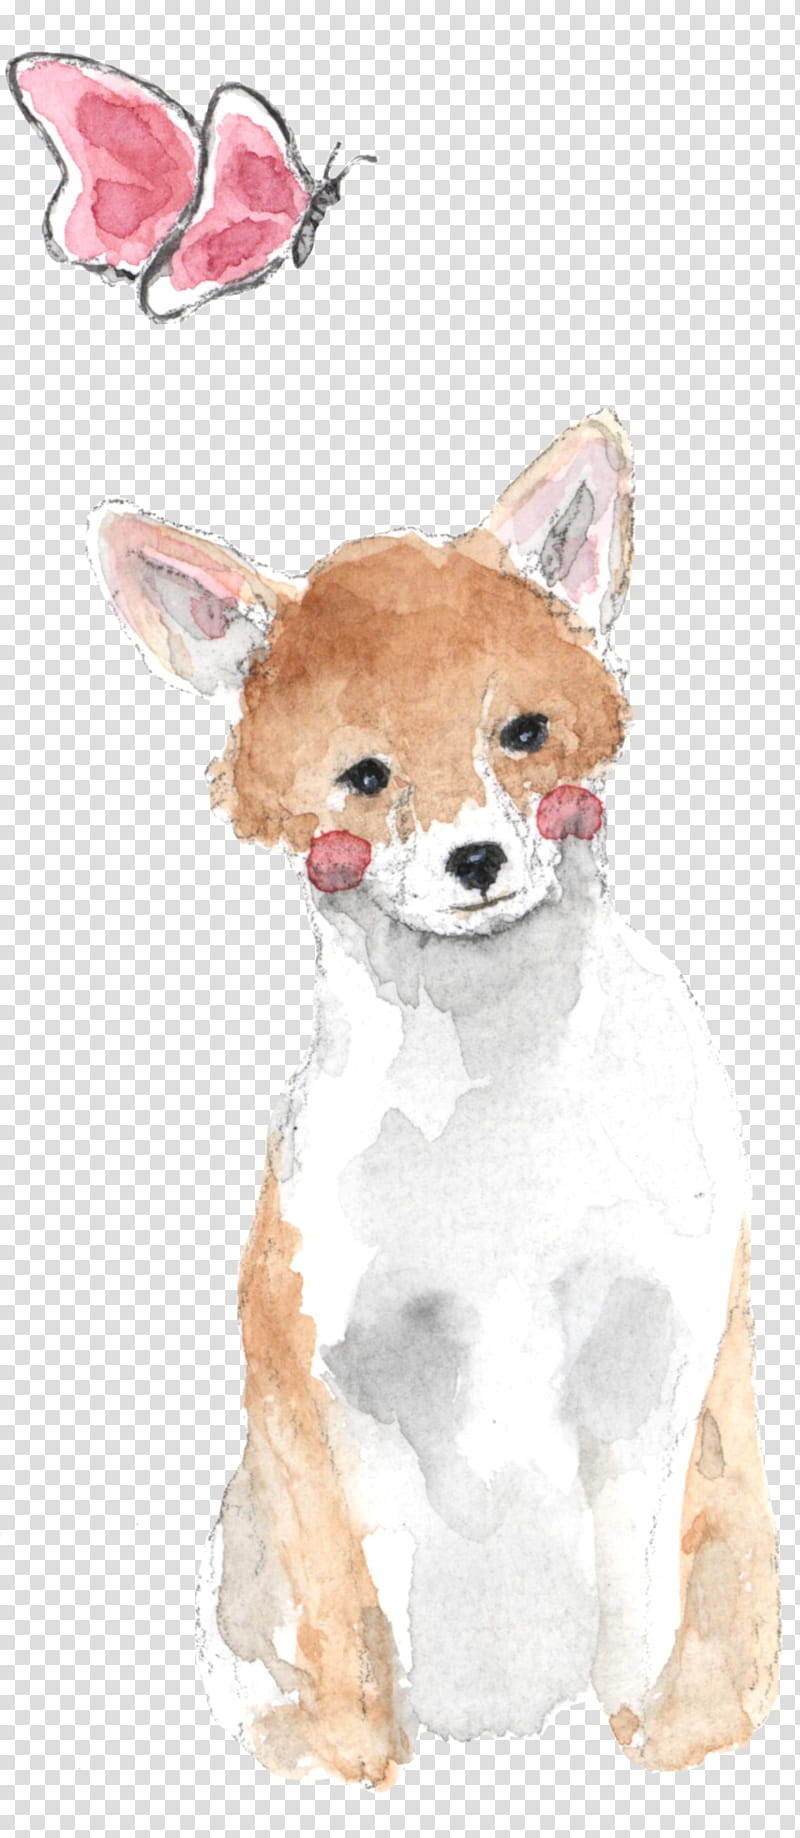 Pomeranian, Chihuahua, Puppy, RED Fox, Cavachon, Companion Dog, Cavoodle, Breed transparent background PNG clipart